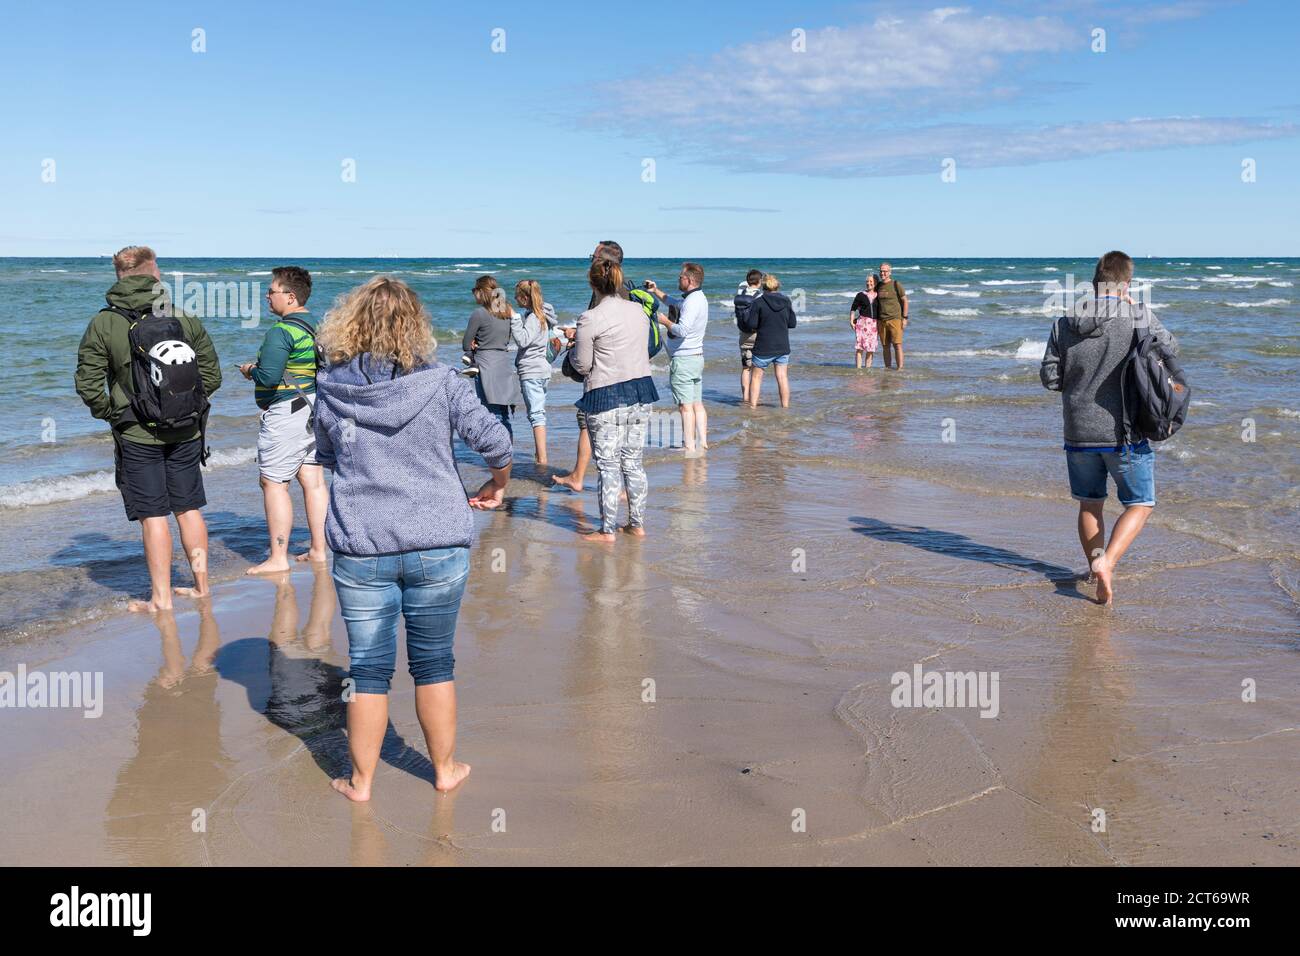 Skagen, Denmark - August 31, 2020: At, Grenen, the northernmost point of Denmark, where Baltic Sea and North Sea waves meet, tourists are watching, po Stock Photo